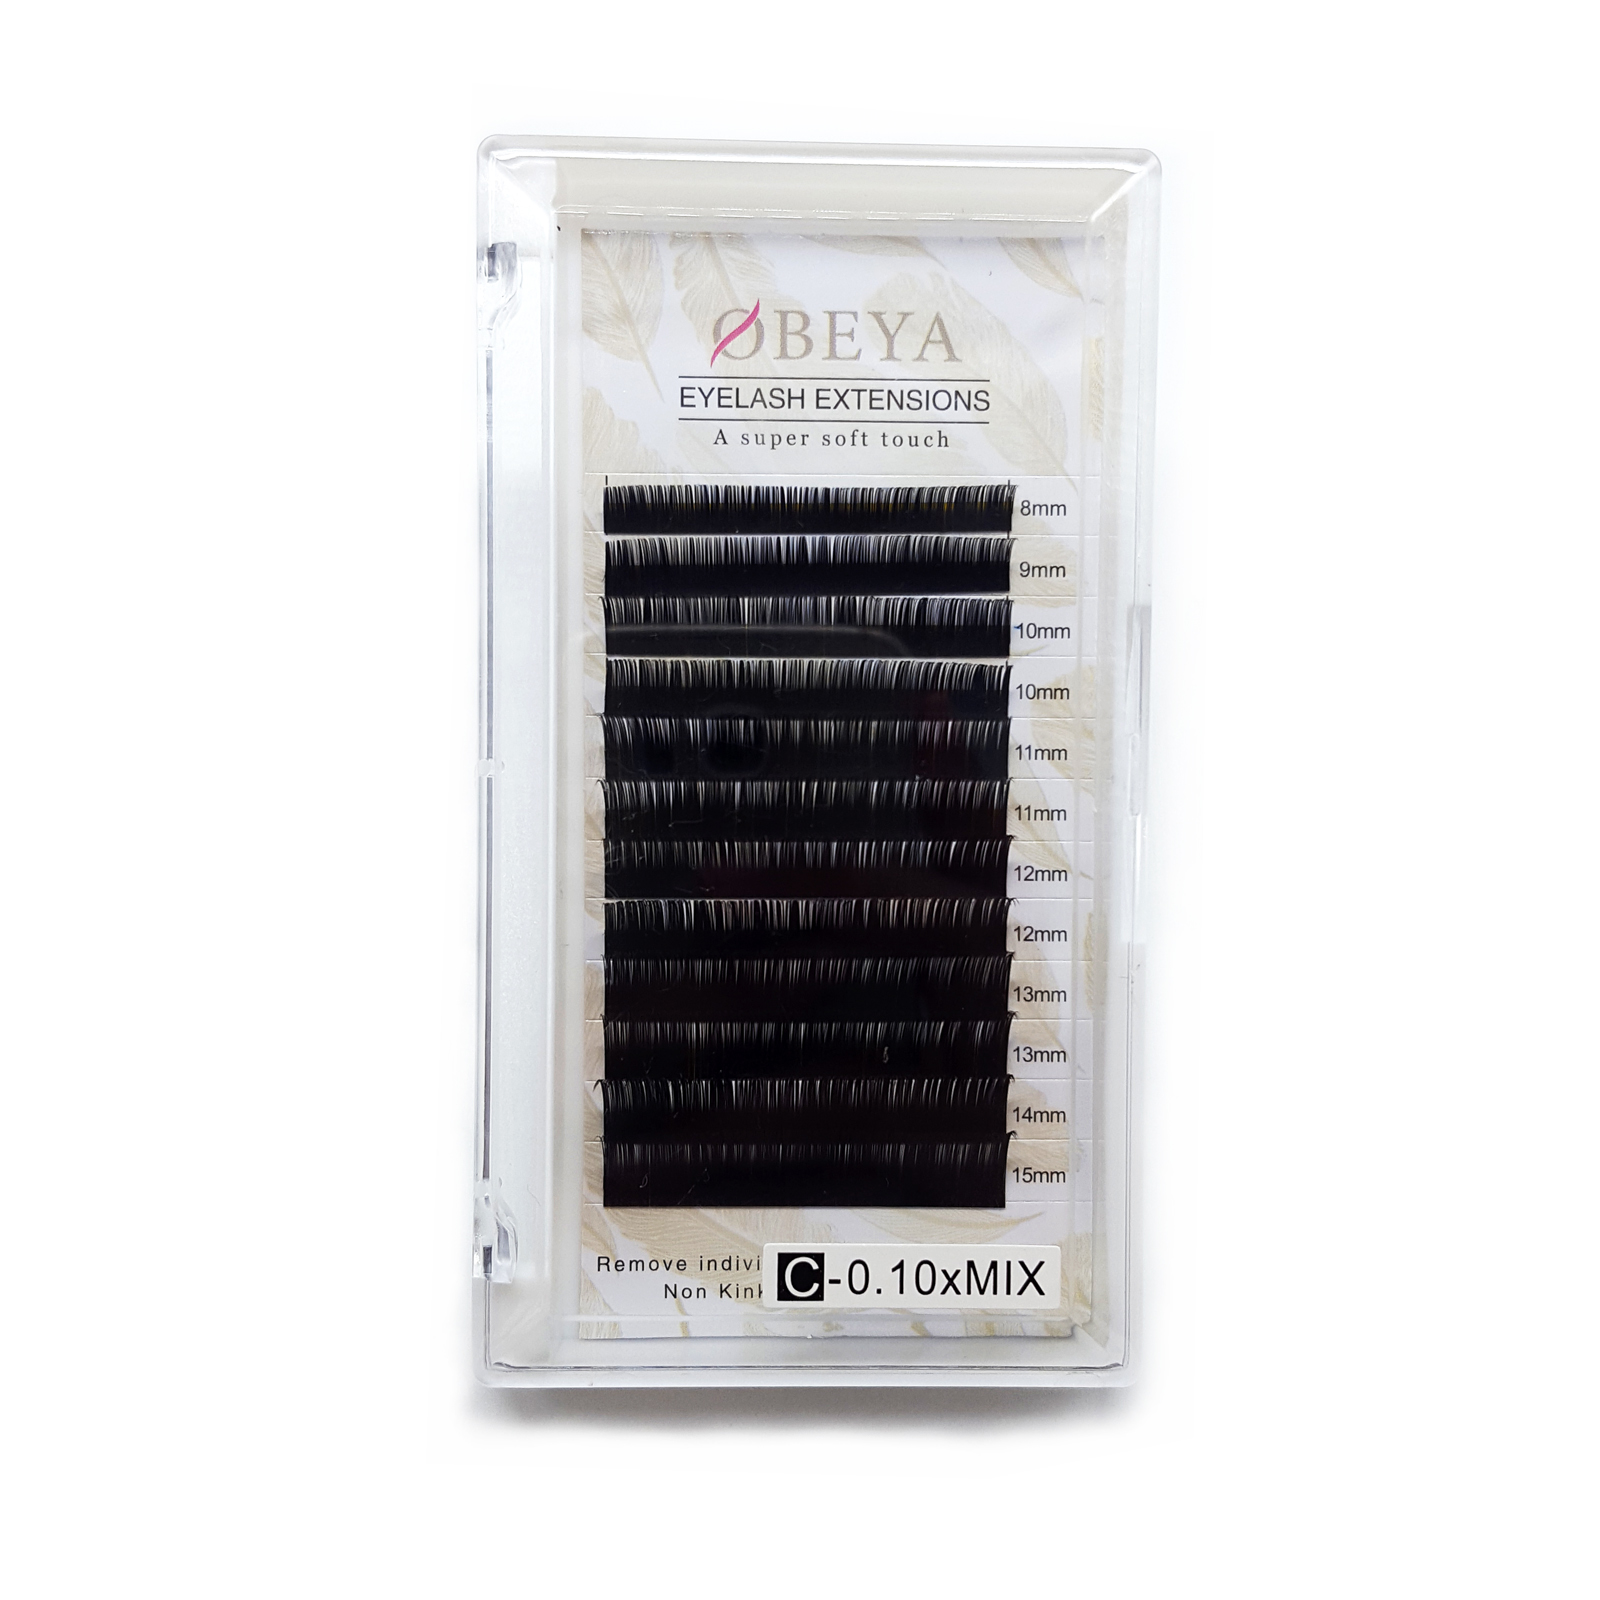 2019 Wholesale Price Hot Seller Russian Volume Lashes ODM OEM Individual Lashes Extension Russia UK USA YY45